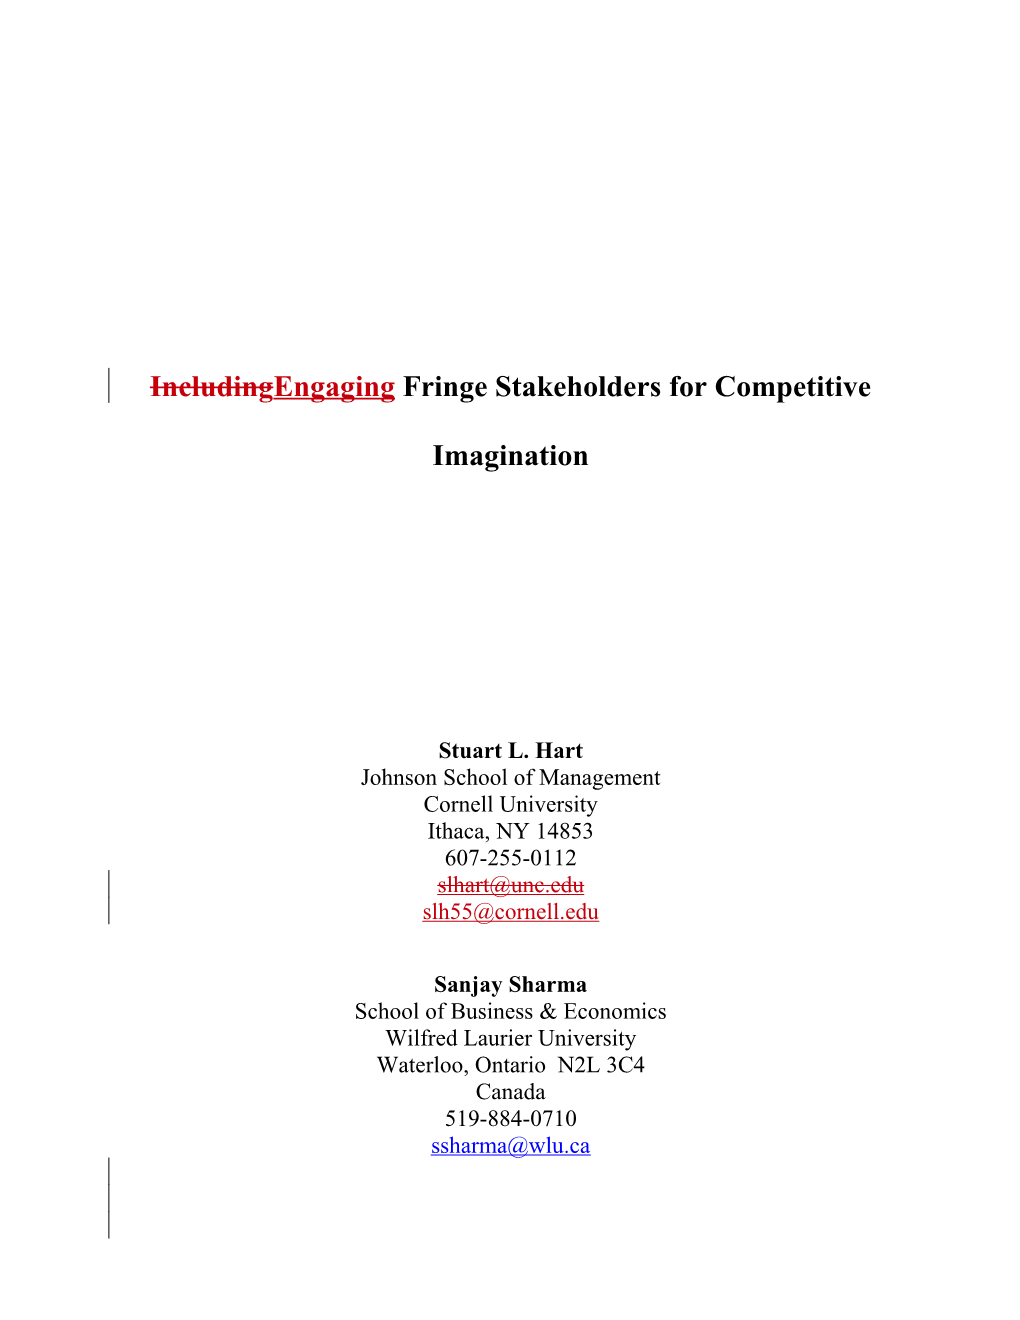 Sustainable Strategies and the Dynamic Competitive Capability of Stakeholder Integration